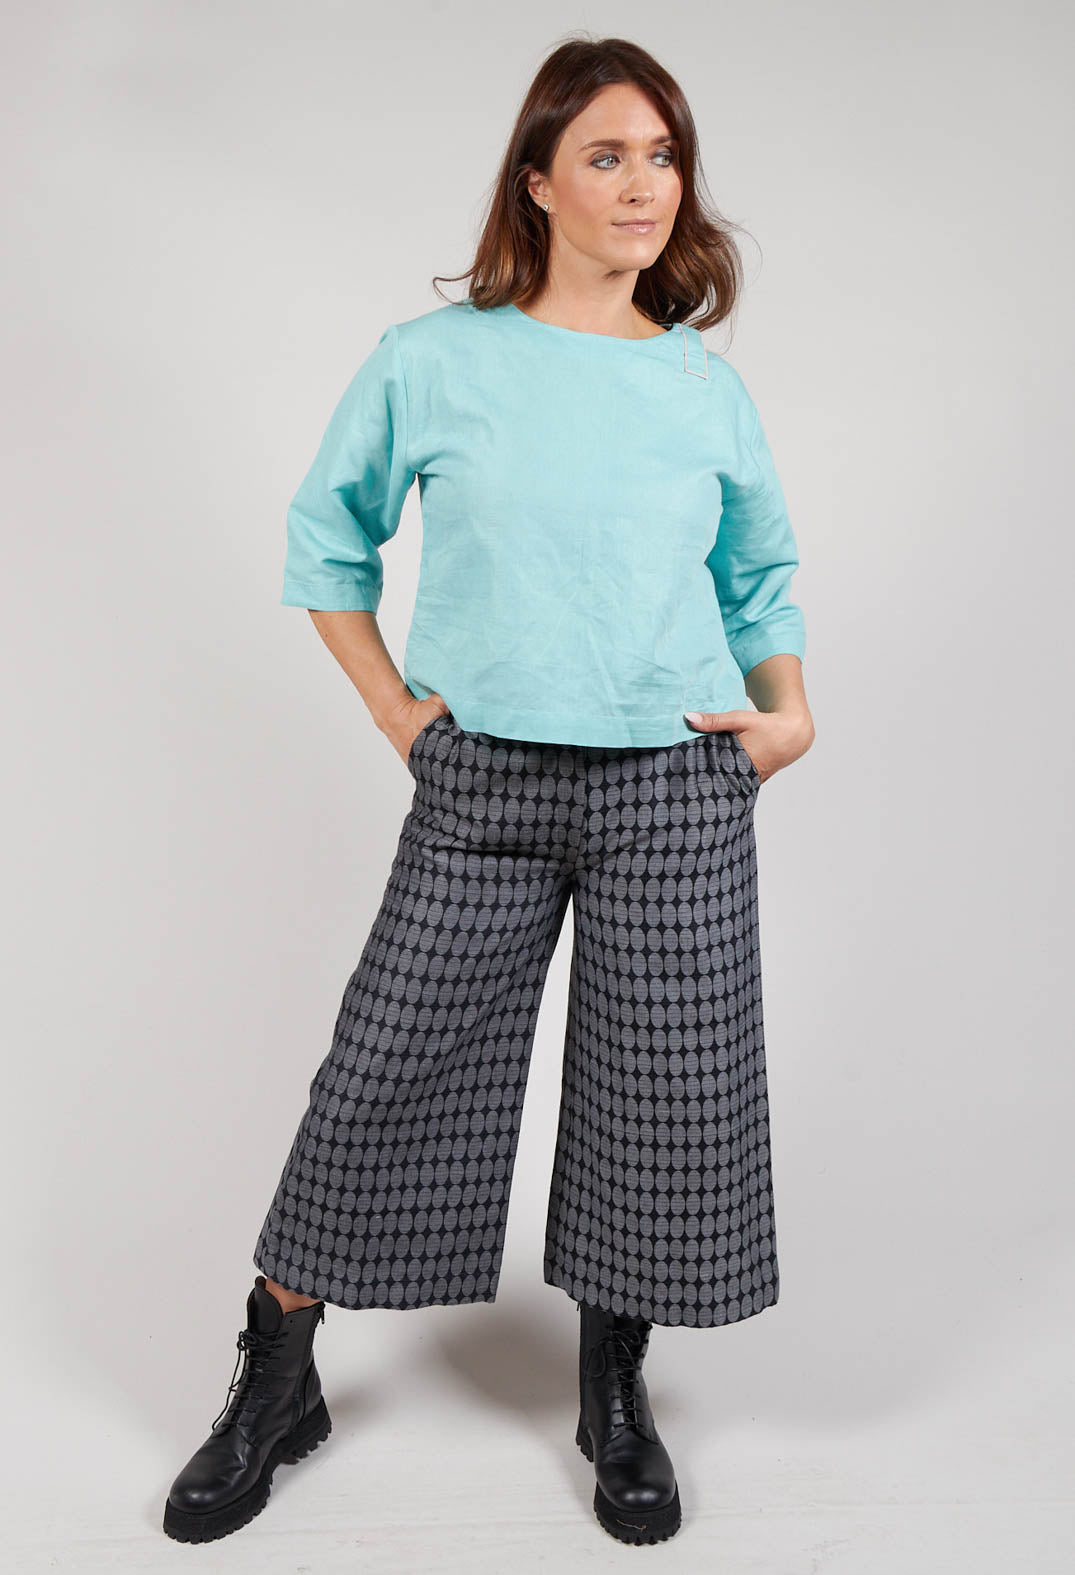 Circled Jacquard Cotton Culottes in Grey